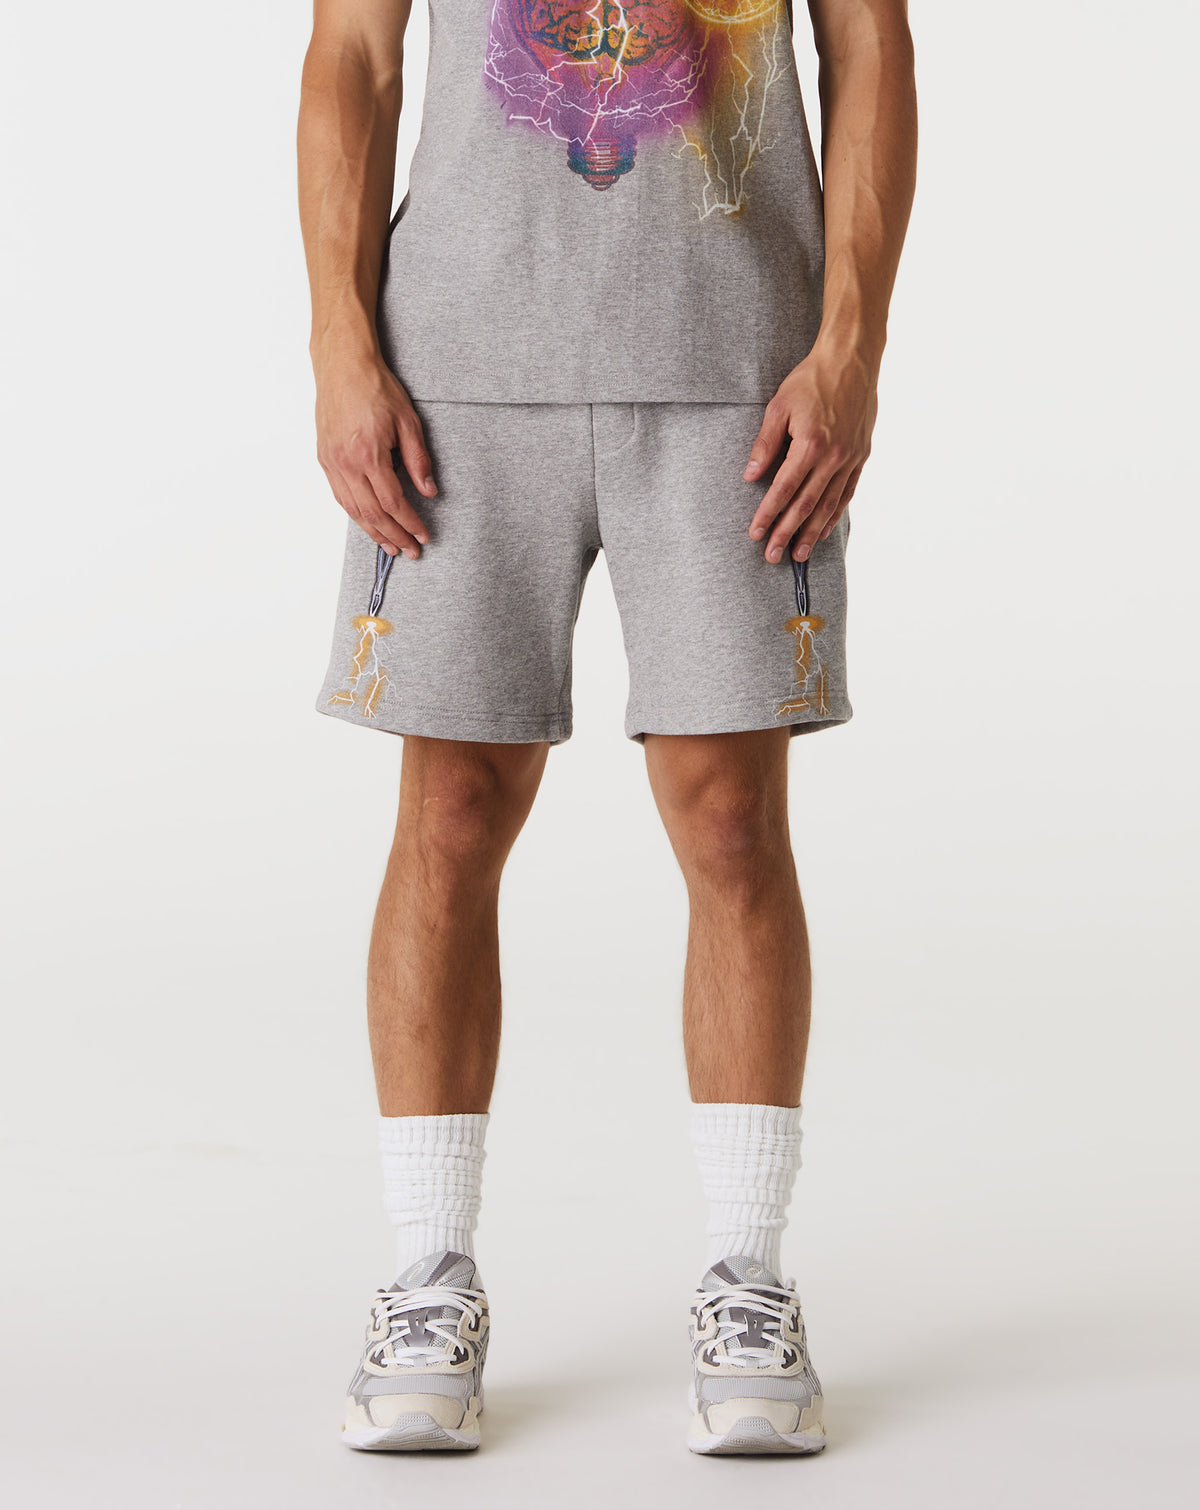 Doctrine Dagger Wave Shorts - Rule of Next Apparel